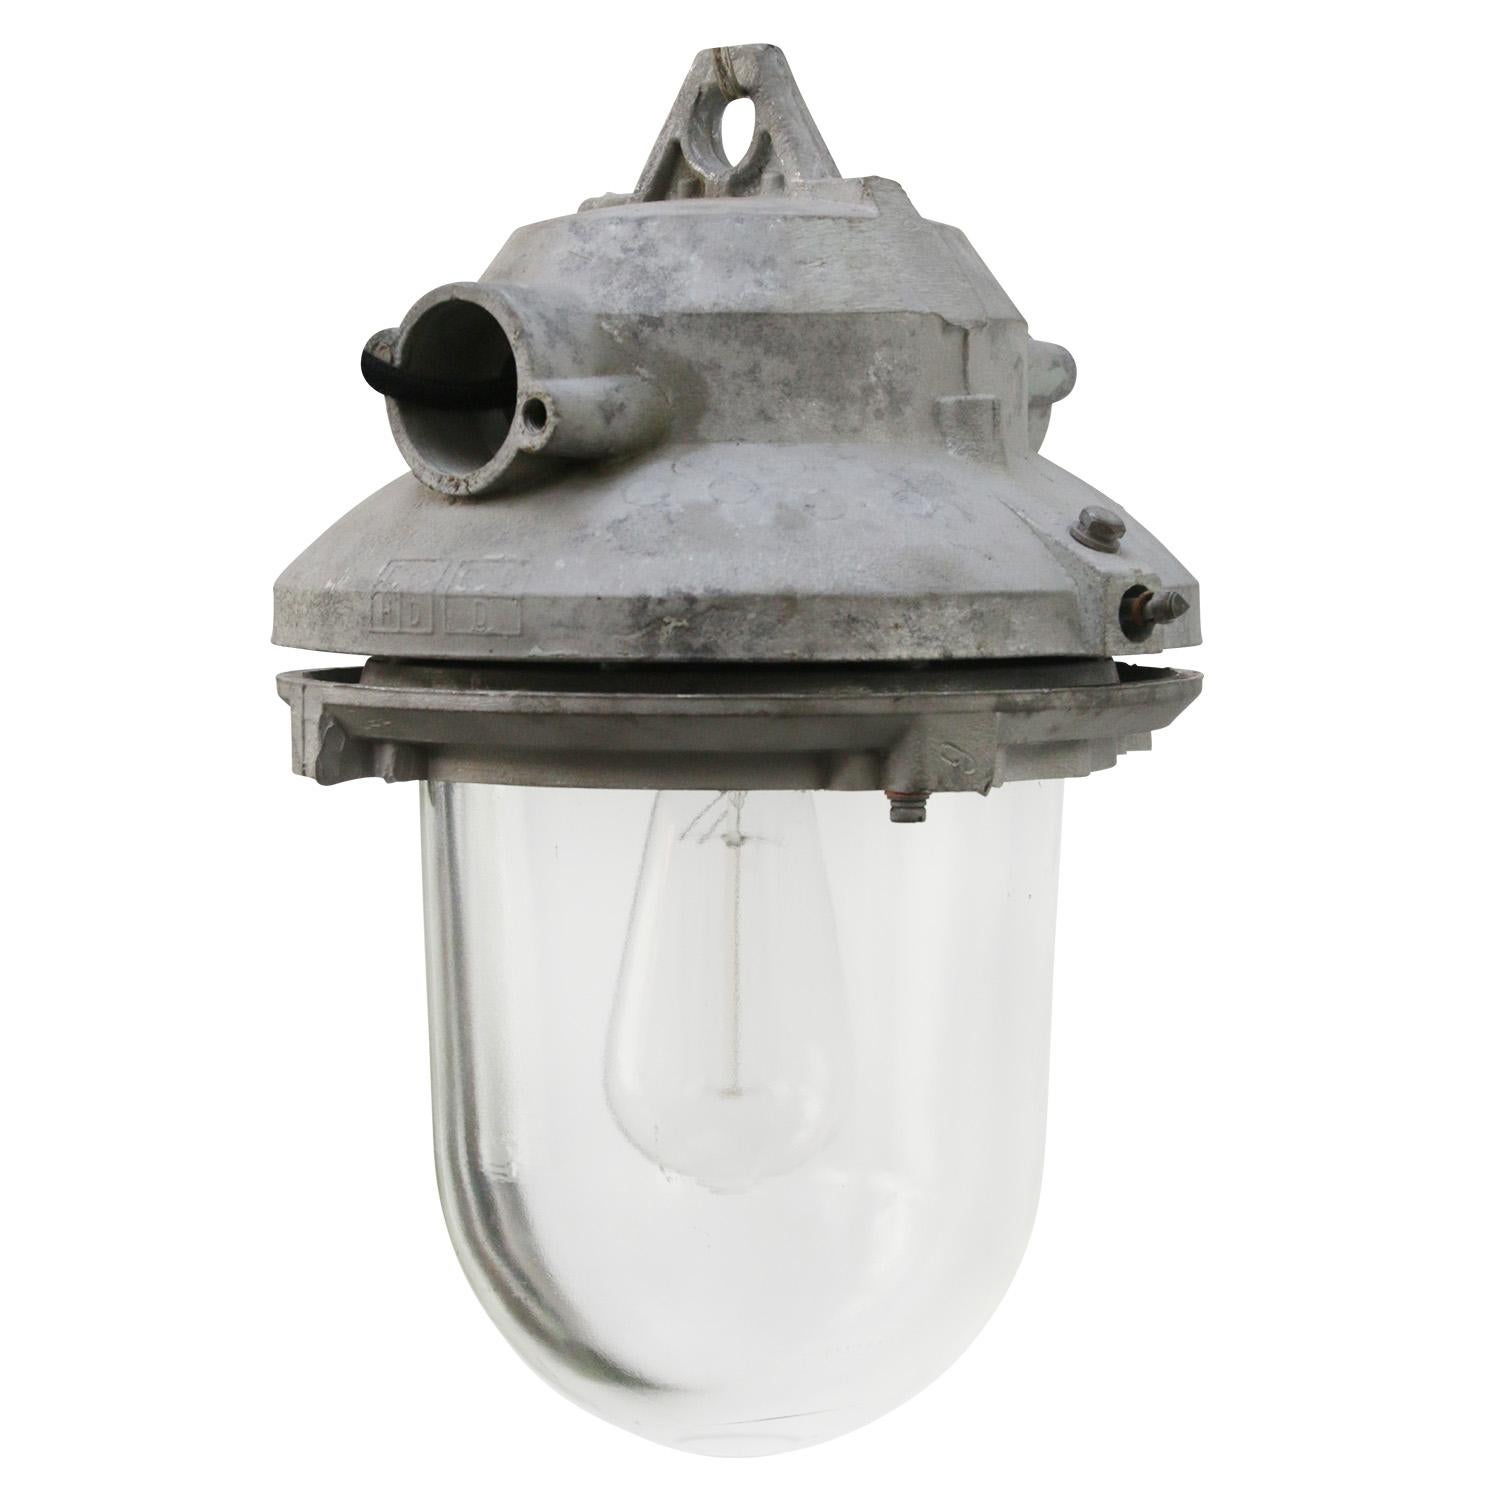 Industrial hanging lamp.
Grey aluminum clear glass.

Weight: 8.50 kg / 18.7 lb

Priced per individual item. All lamps have been made suitable by international standards for incandescent light bulbs, energy-efficient and LED bulbs. E26/E27 bulb